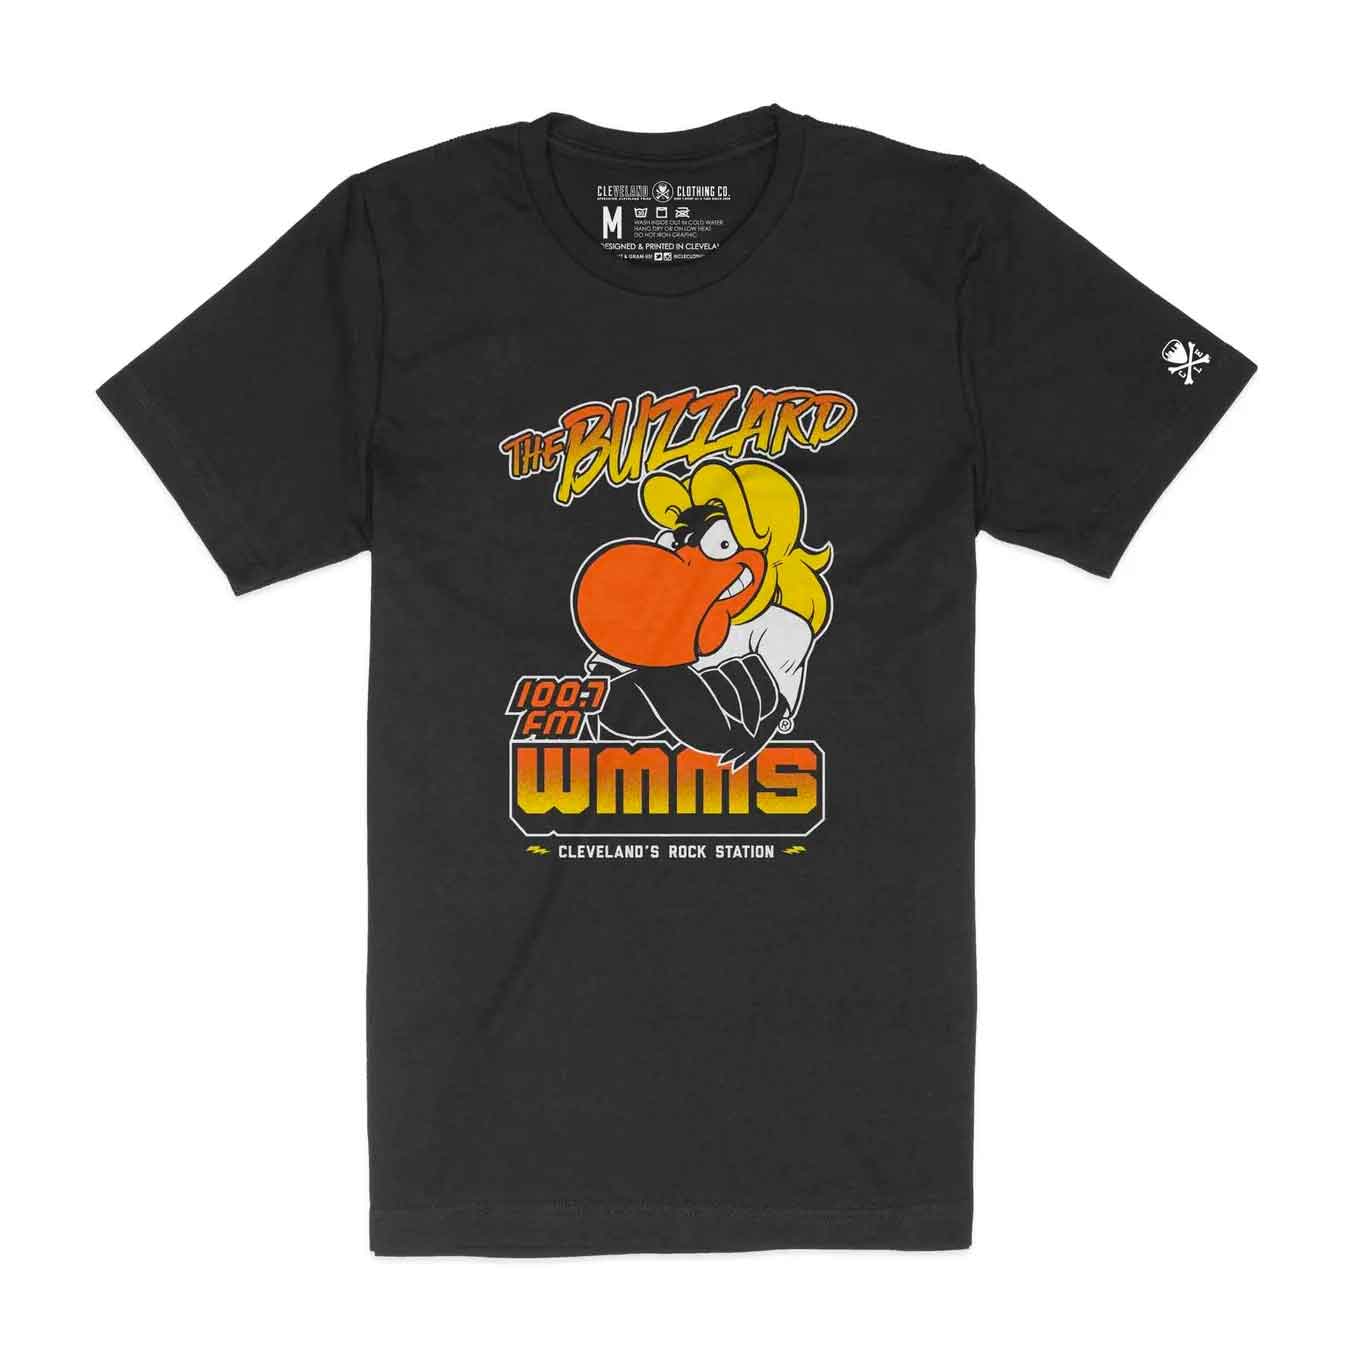 WMMS The Buzzard - Unisex Crew T-Shirt *Officially Licensed